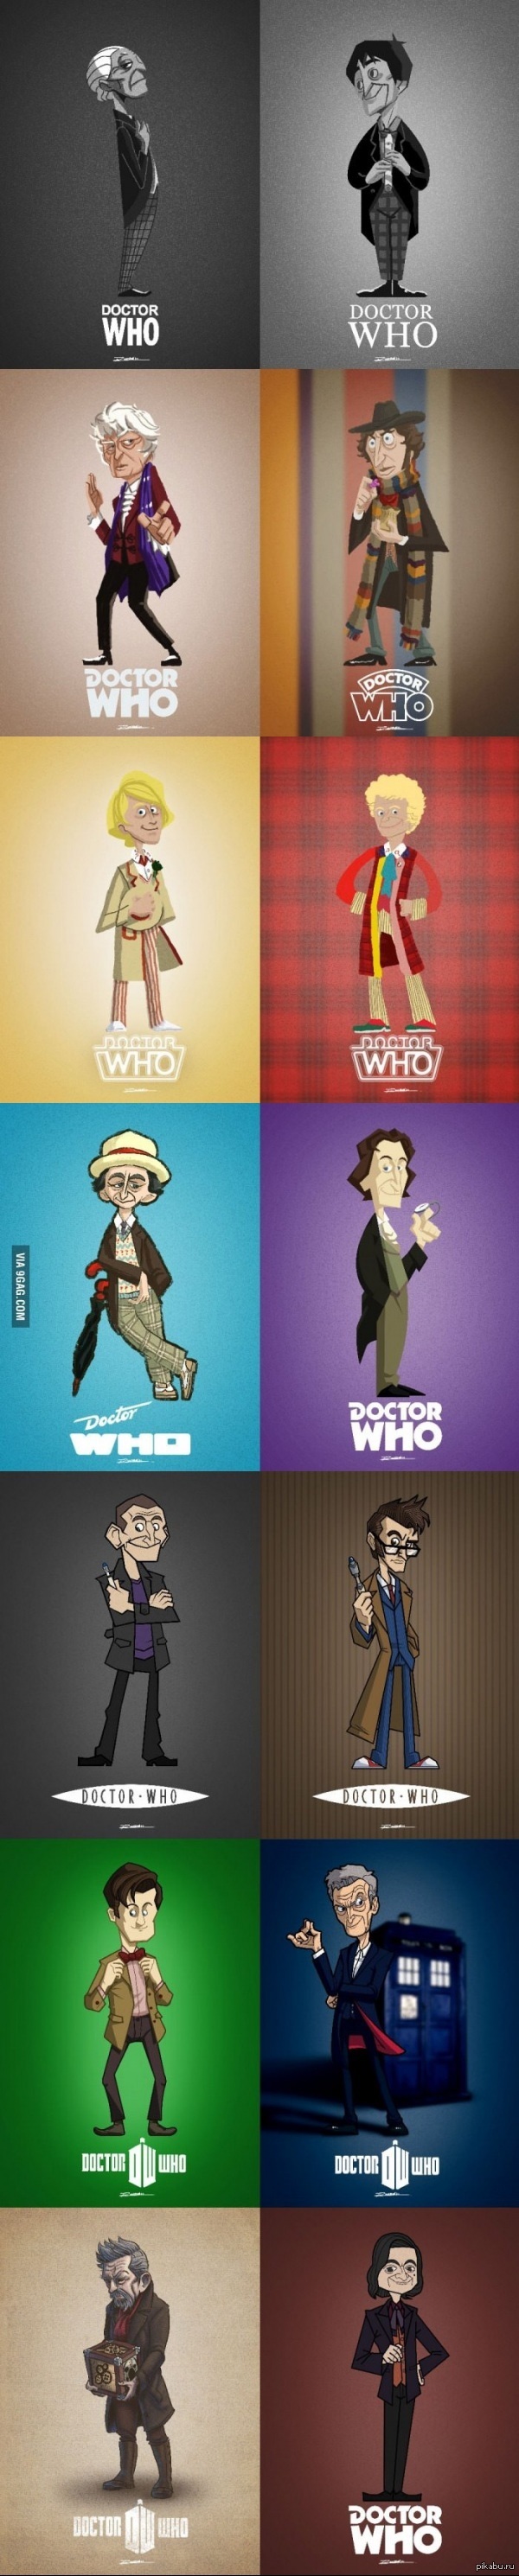 Doctor Who in Cartoon Style. 